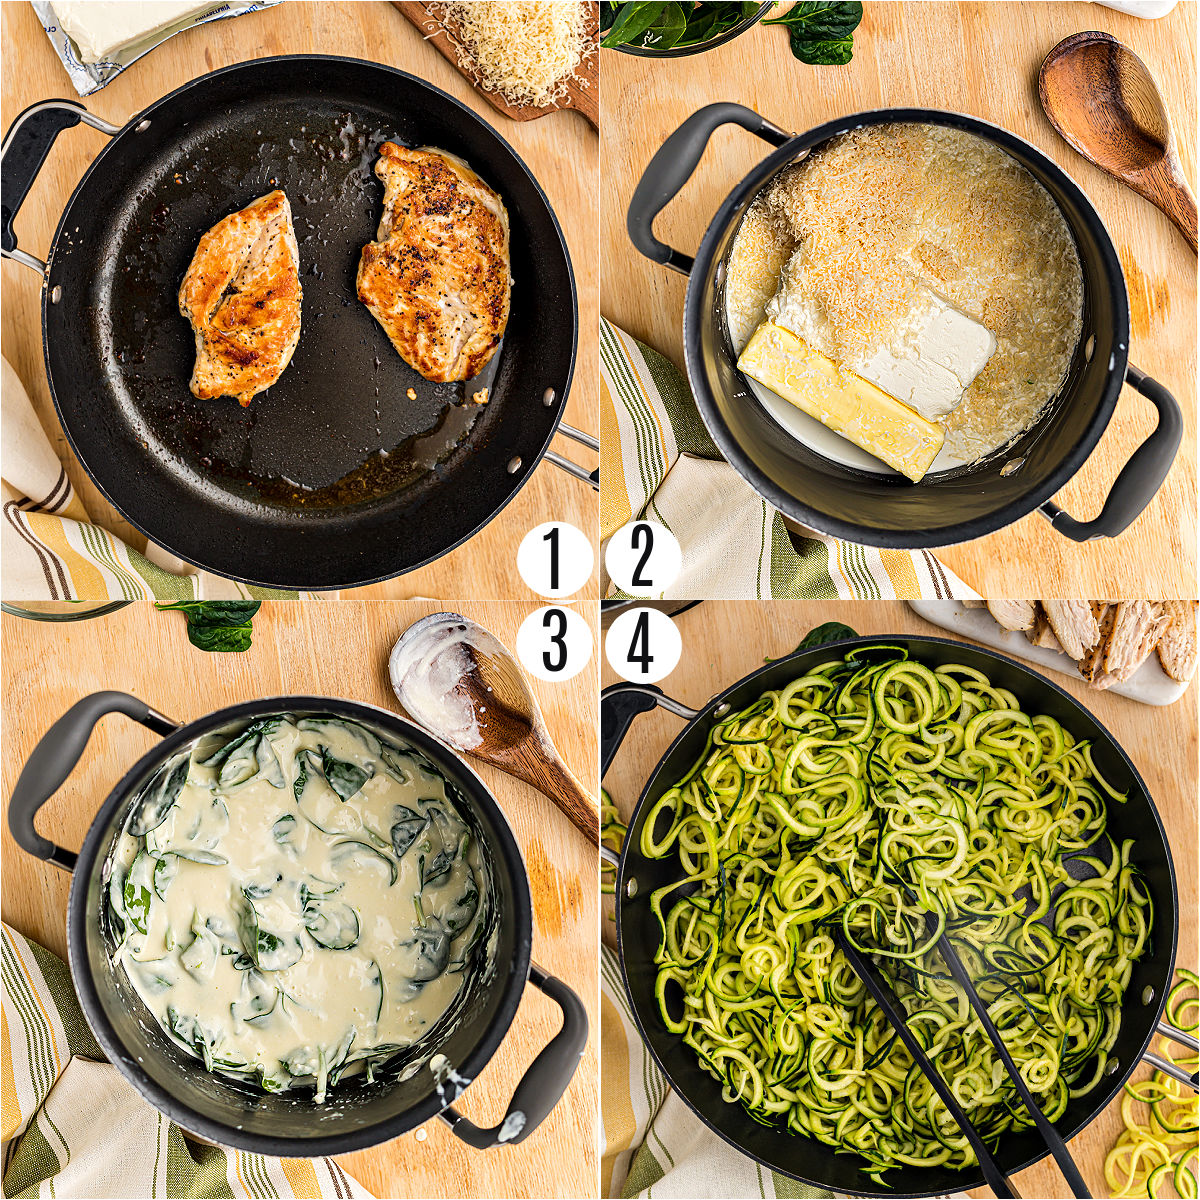 Step by step photos showing how to make chicken alfredo zoodles.